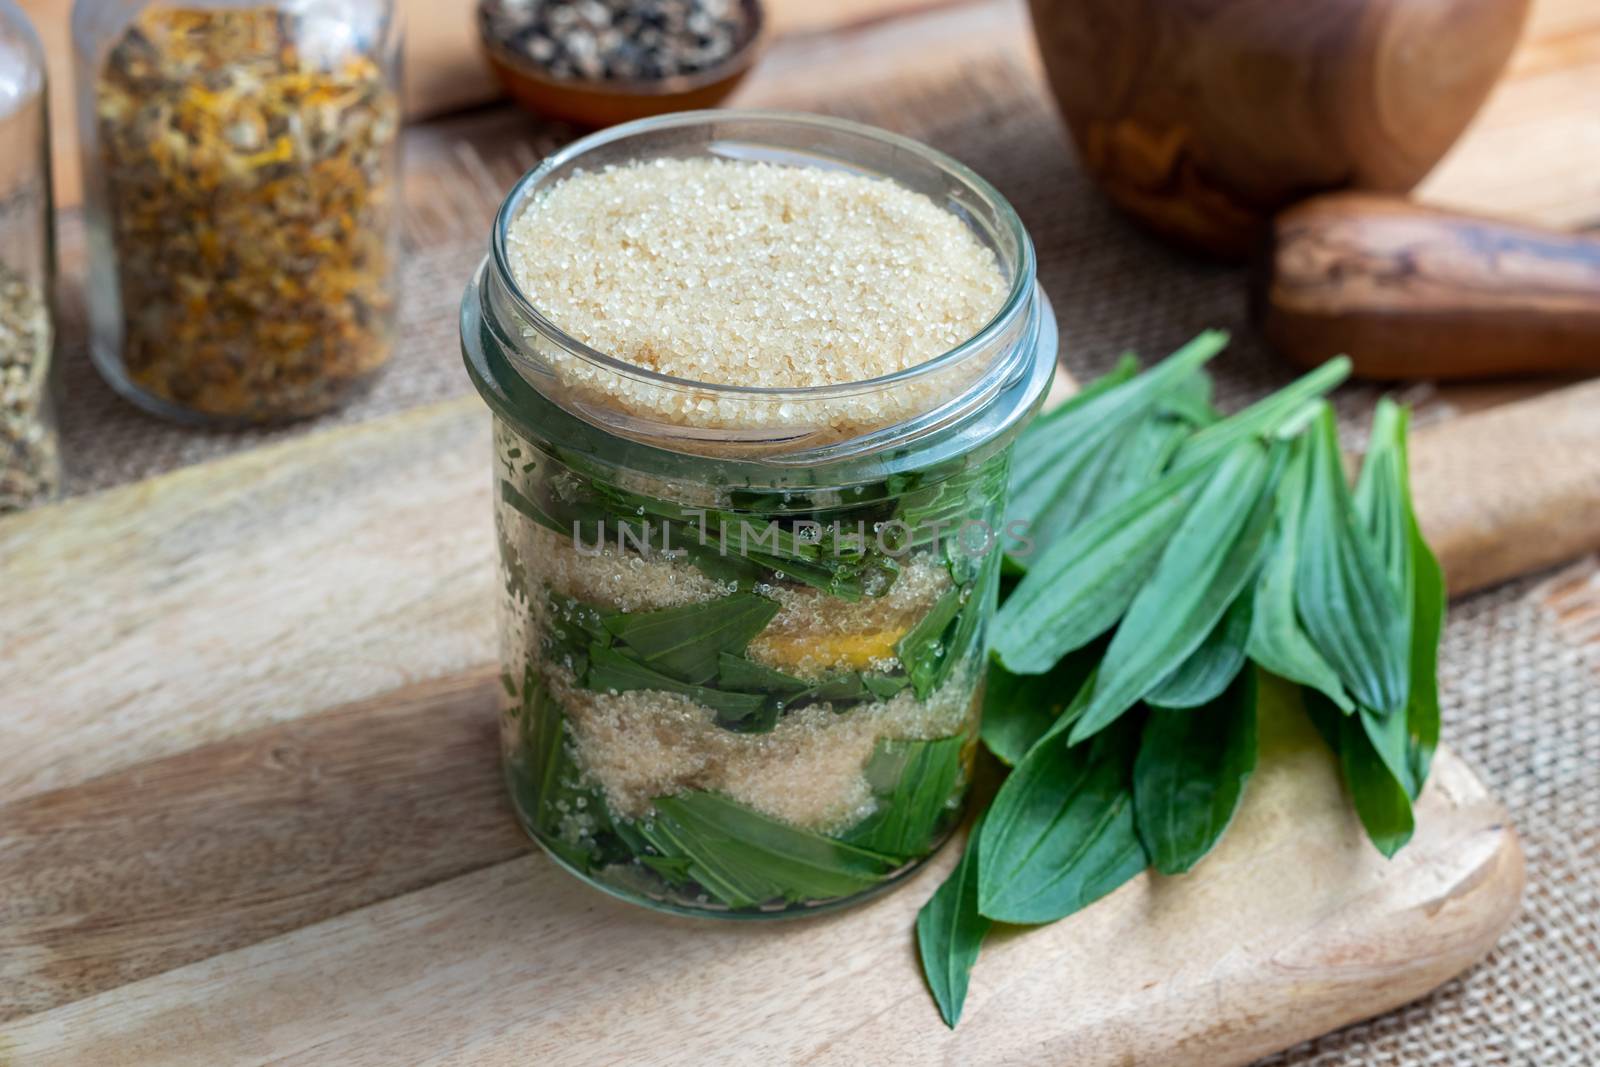 A jar filled with ribwort plantain leaves, lemon and cane sugar, to prepare homemade syrup against cough